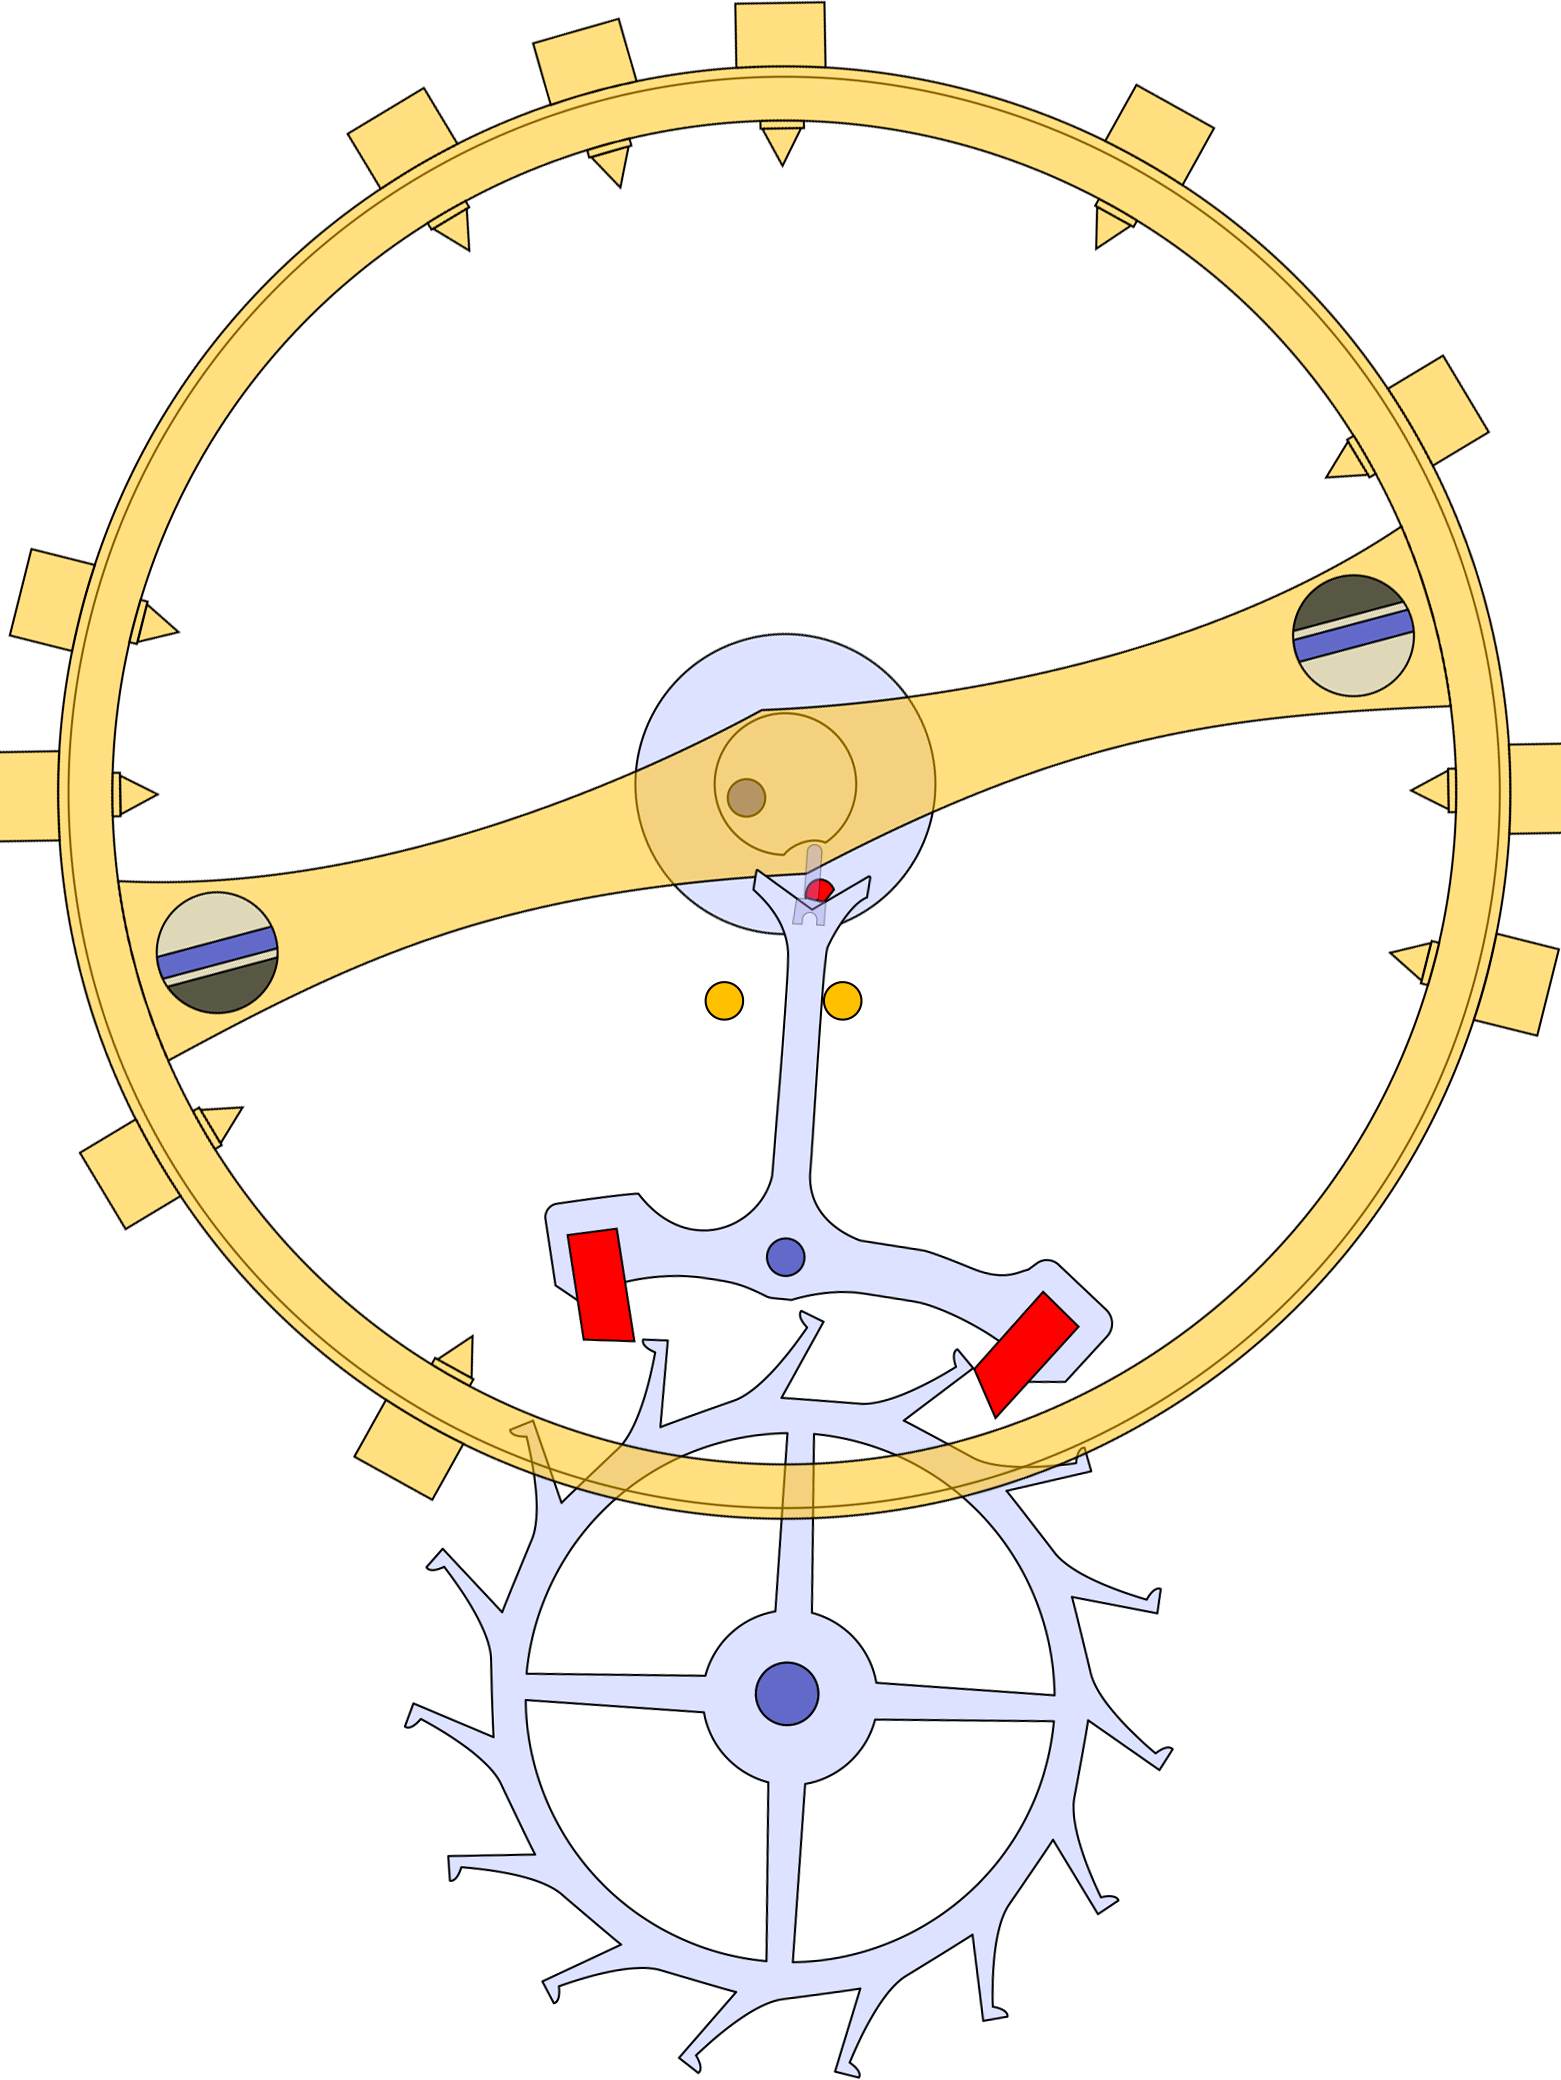 A watch escapement: what it does and how it works - Blog Bonetto Cinturini